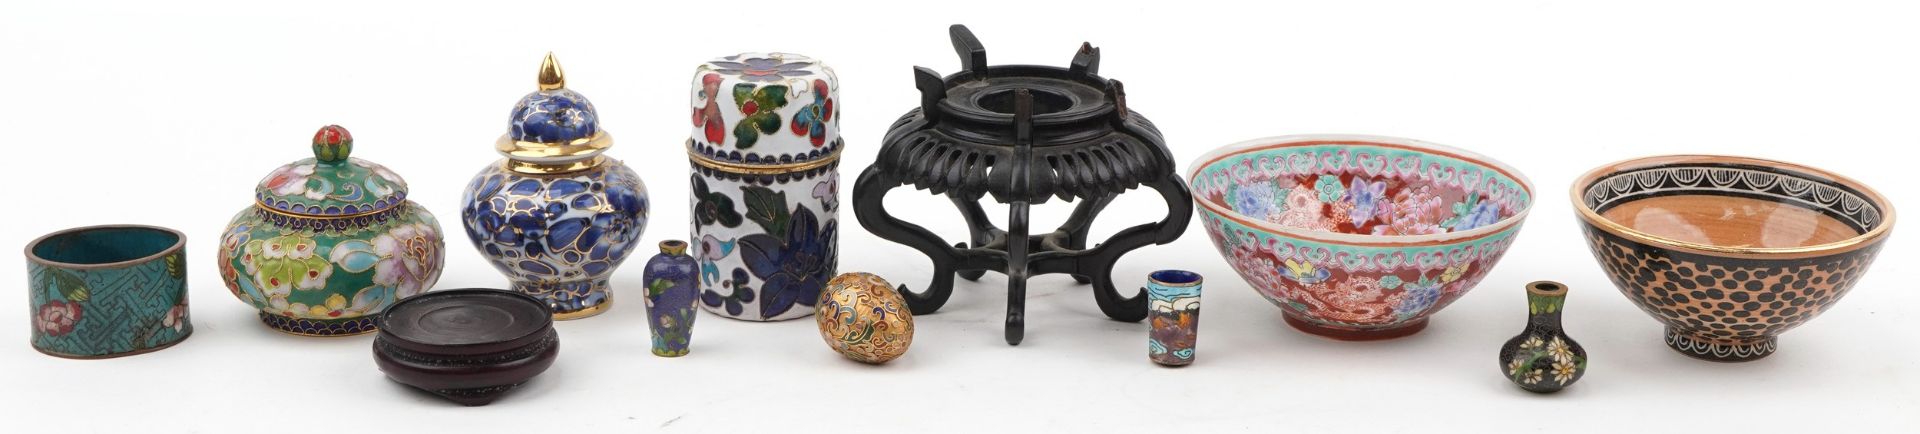 Selection of Chinese items including hand painted porcelain bowl, wooden stands, cloisonne pots